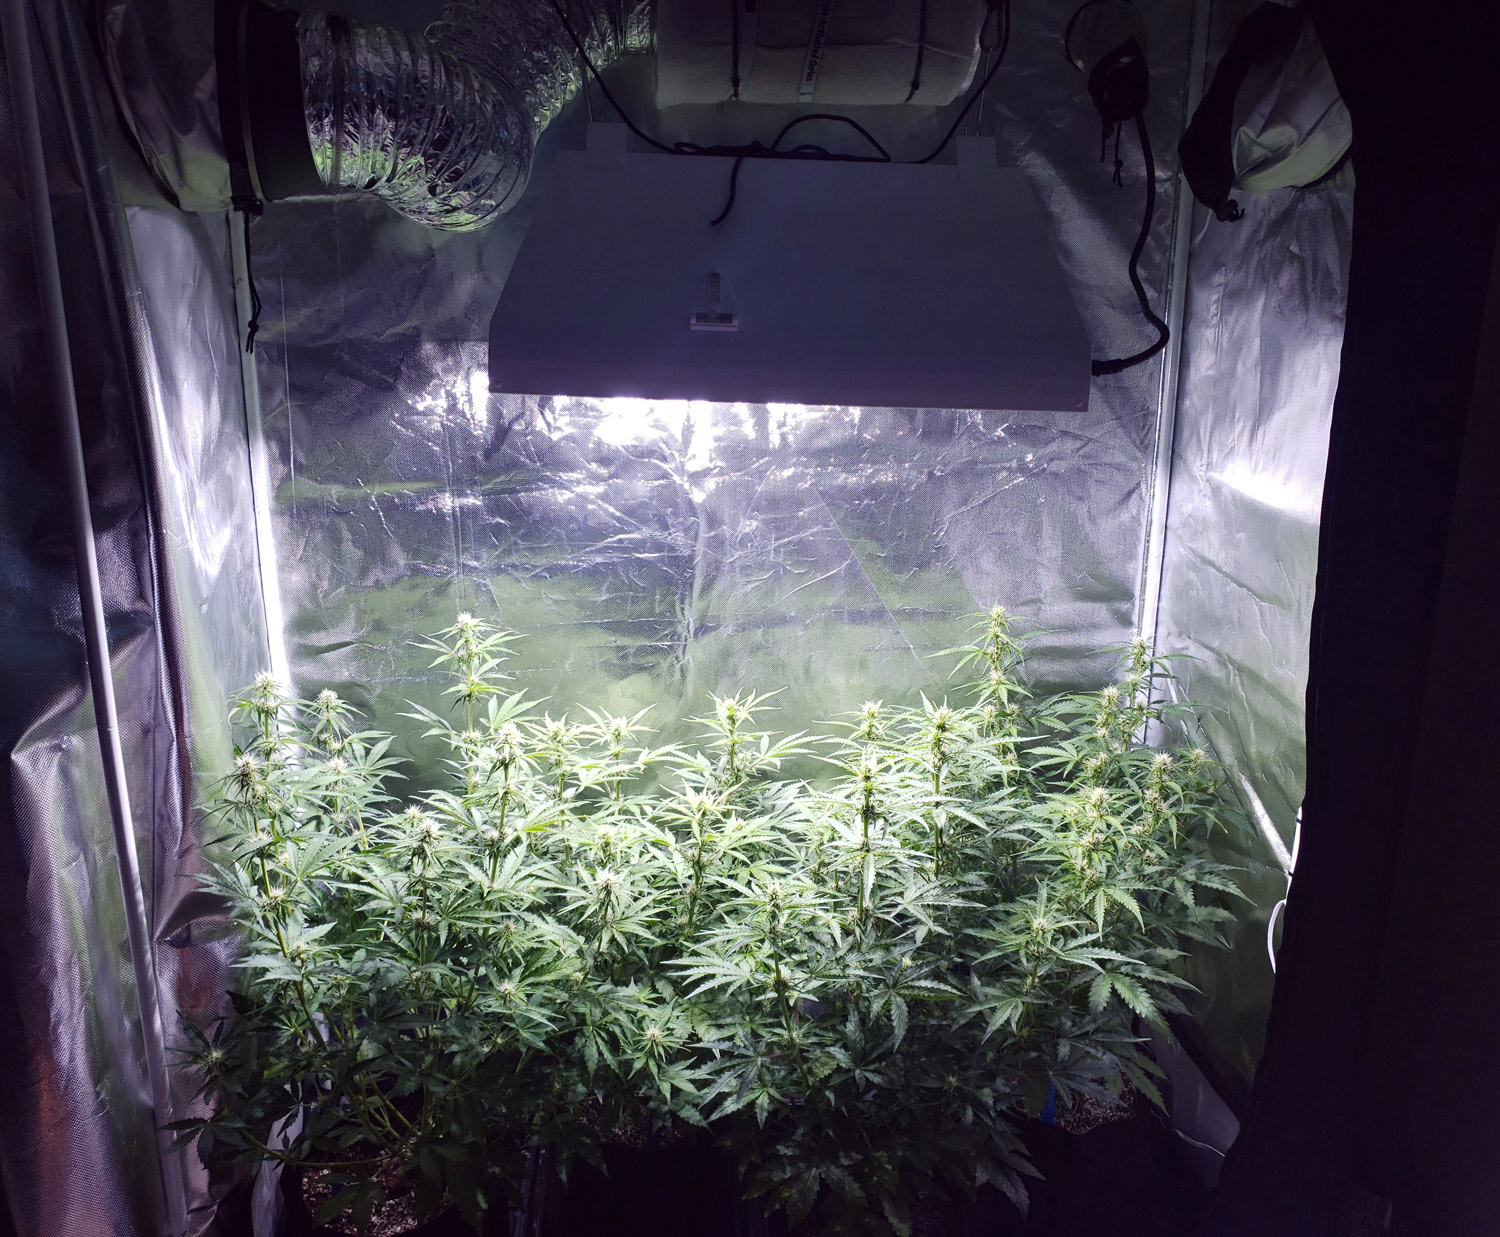 Our mid-sized tent can harvest a pound of weed!